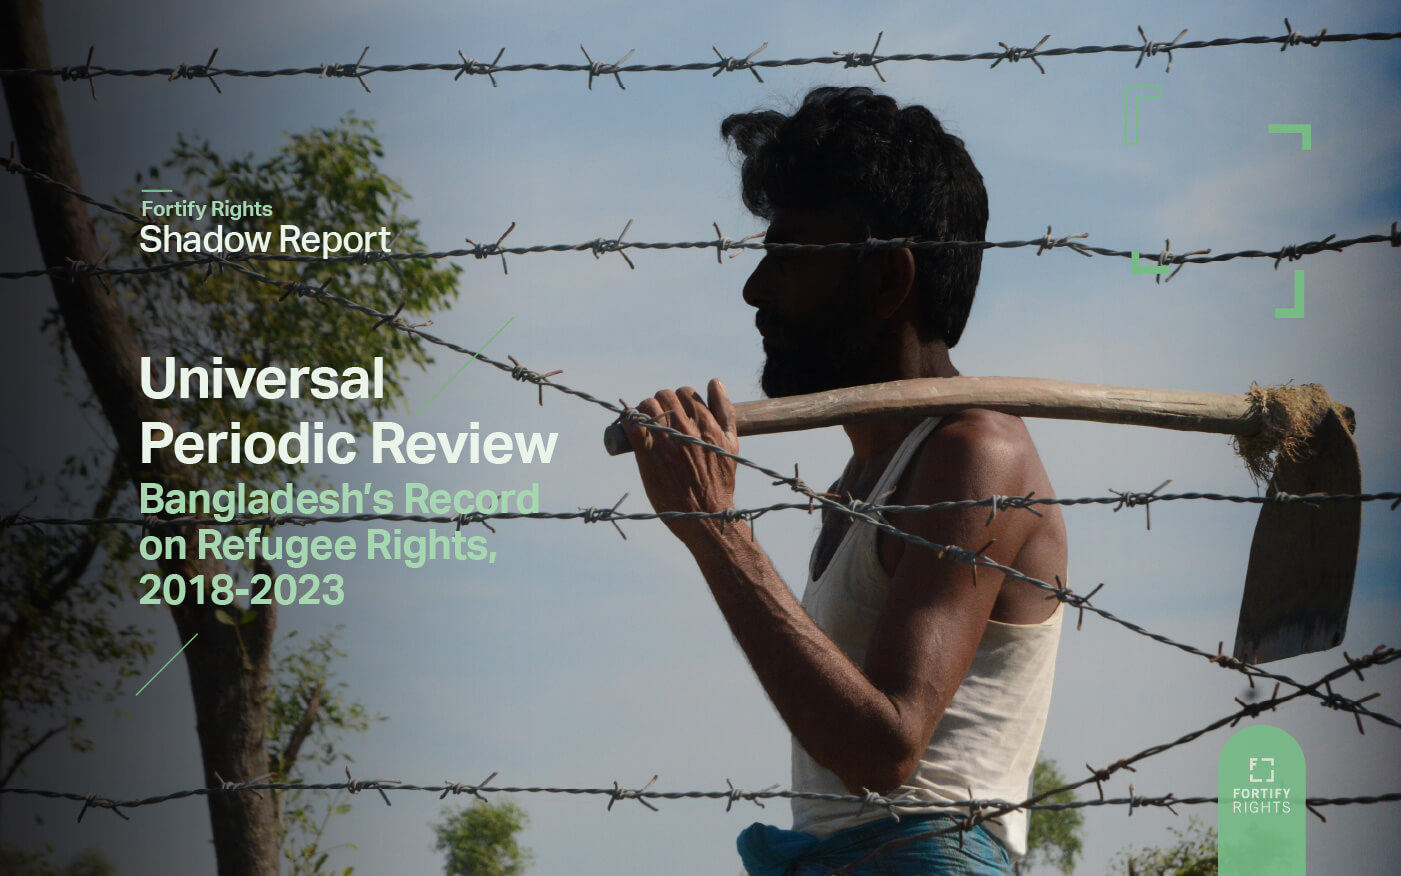 Universal Periodic Review: Bangladesh’s Record on Refugee Rights, 2018-2023